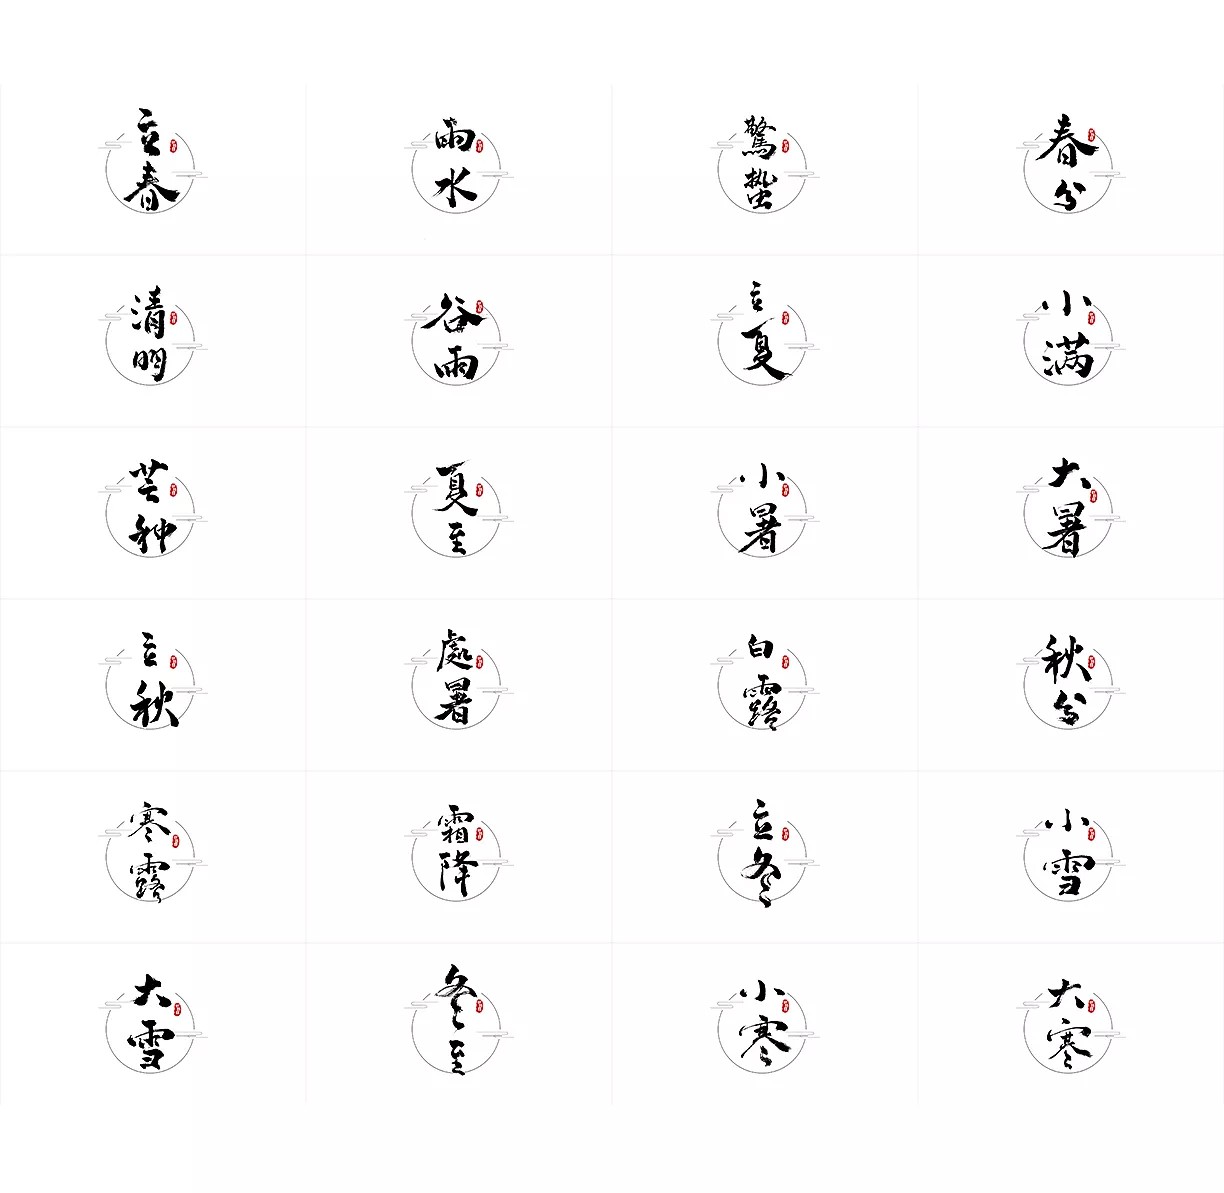 51P Traditional Chinese brush font design style in 24 solar terms